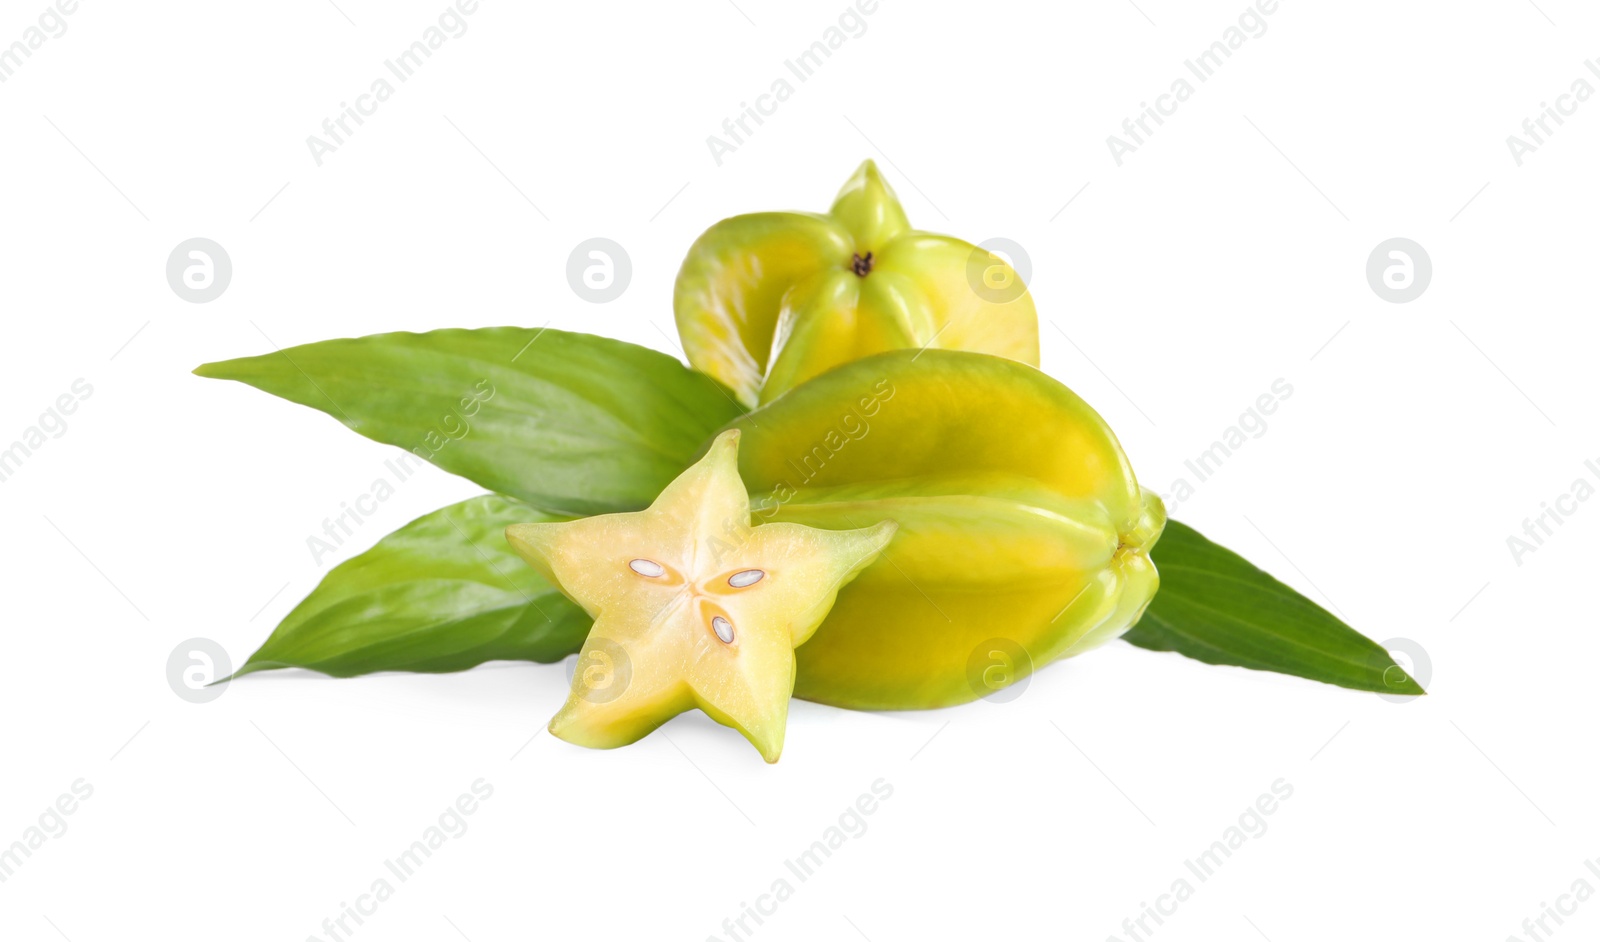 Photo of Cut and whole carambolas with green leaves on white background